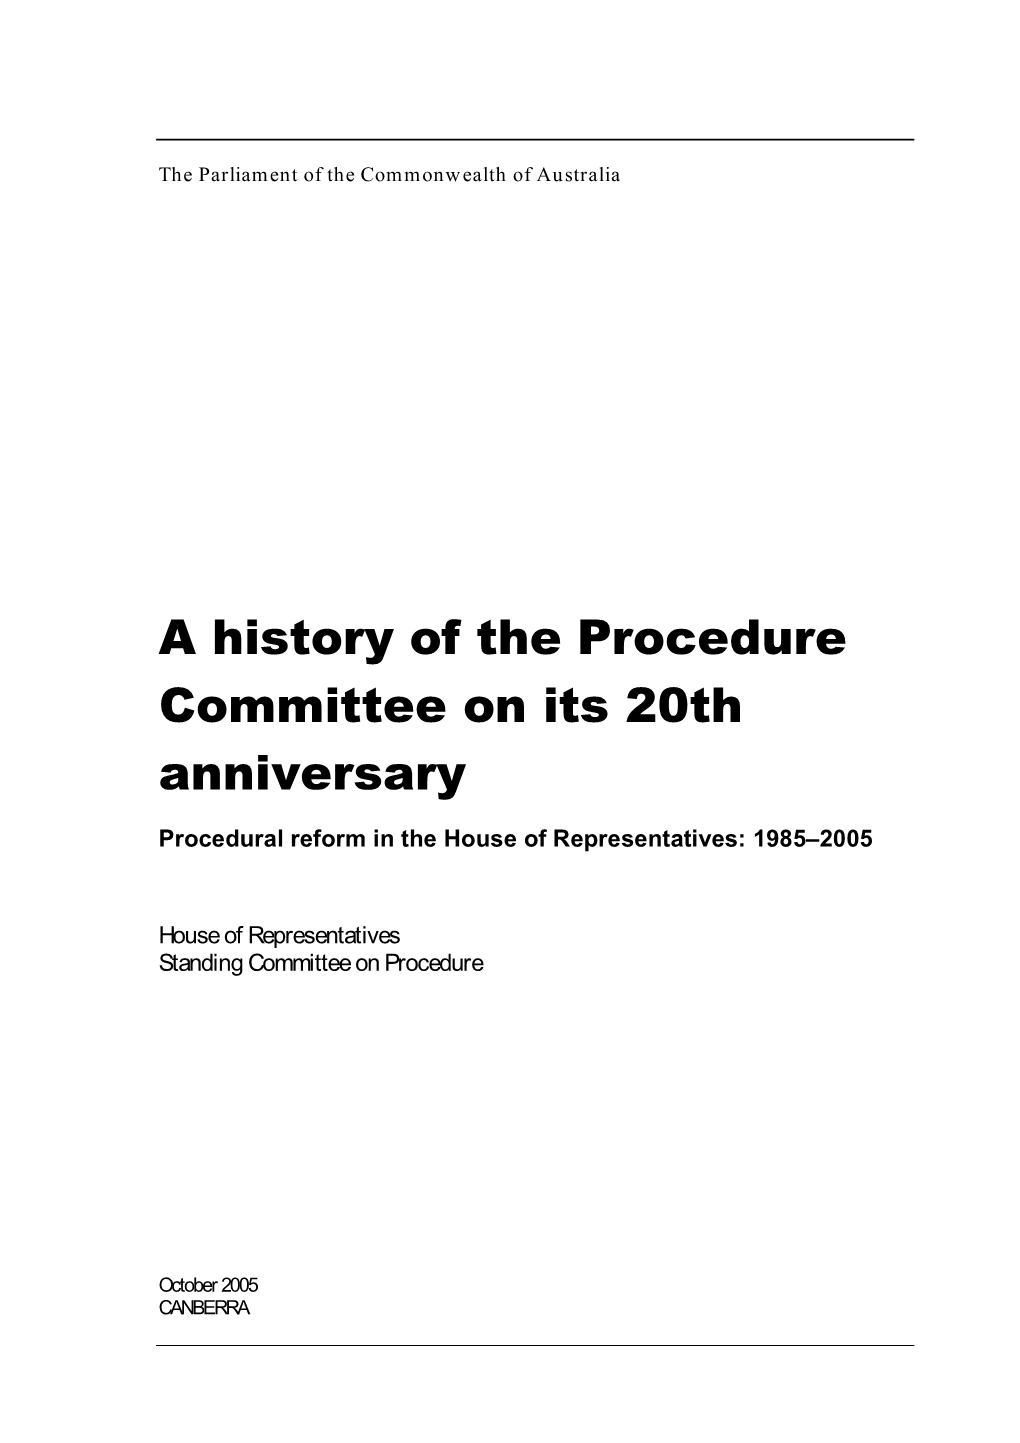 A History of the Procedure Committee on Its 20Th Anniversary